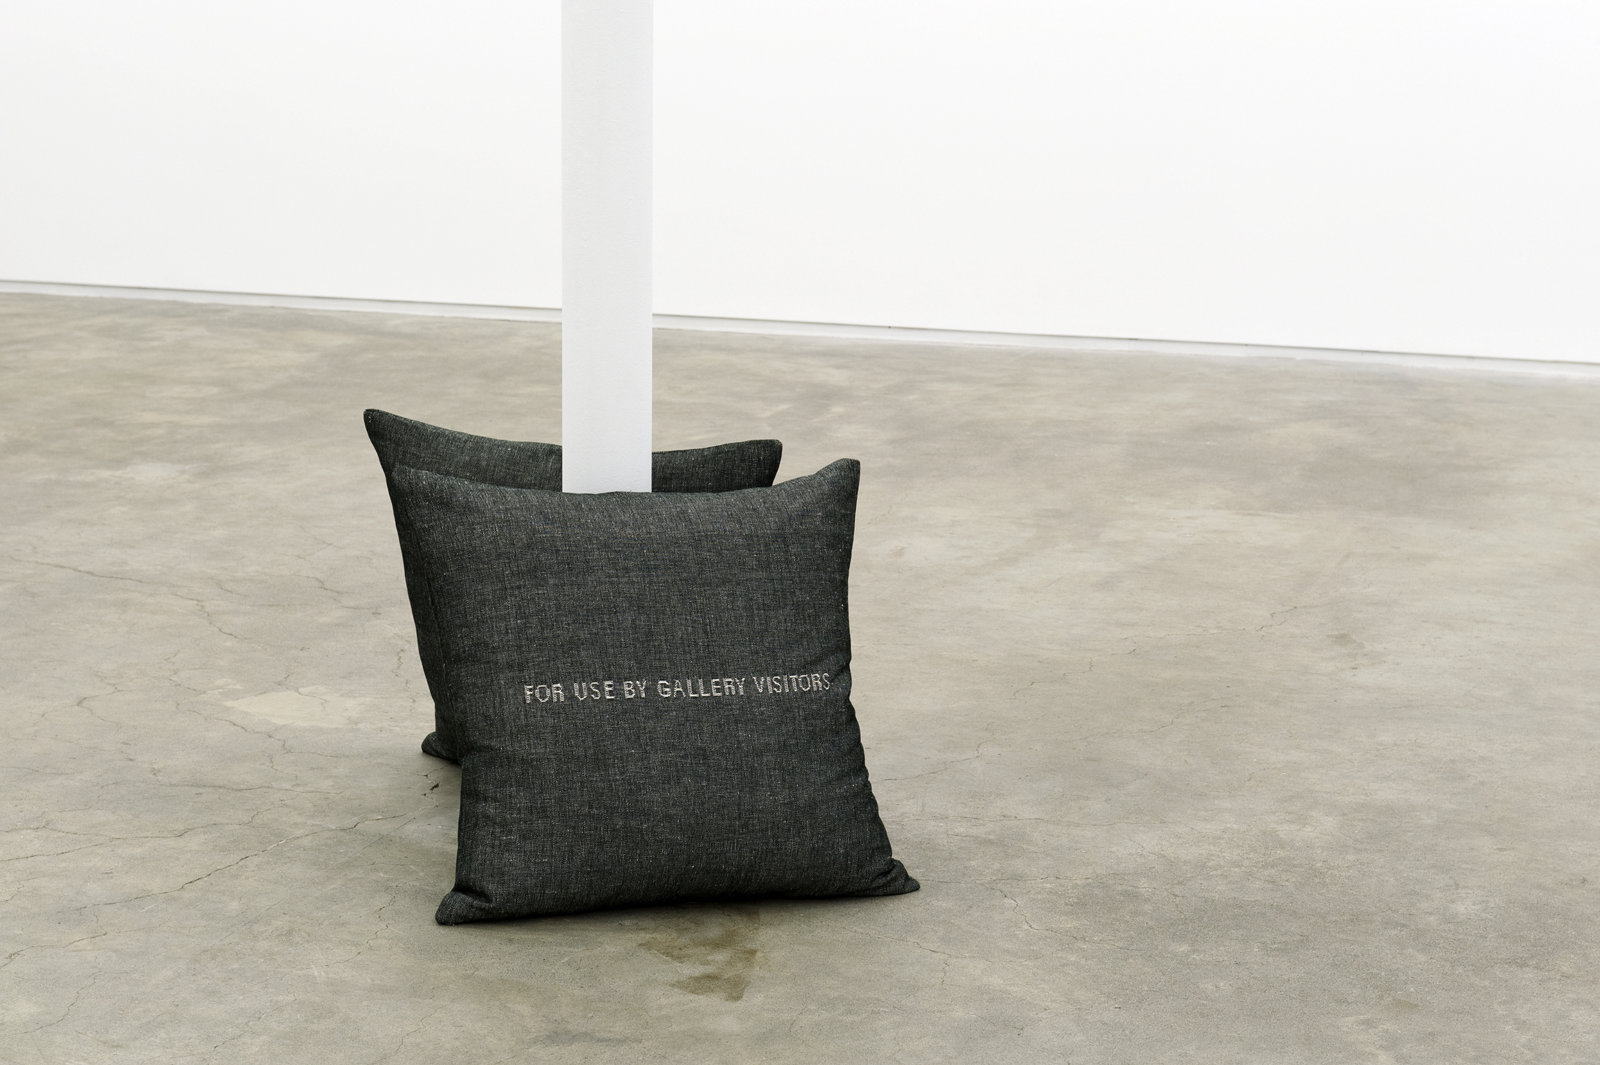 Arabella Campbell, For use by gallery visitors, 2011, woven linen, each 24 x 24 x 8 in. (61 x 61 x 20 cm) by 